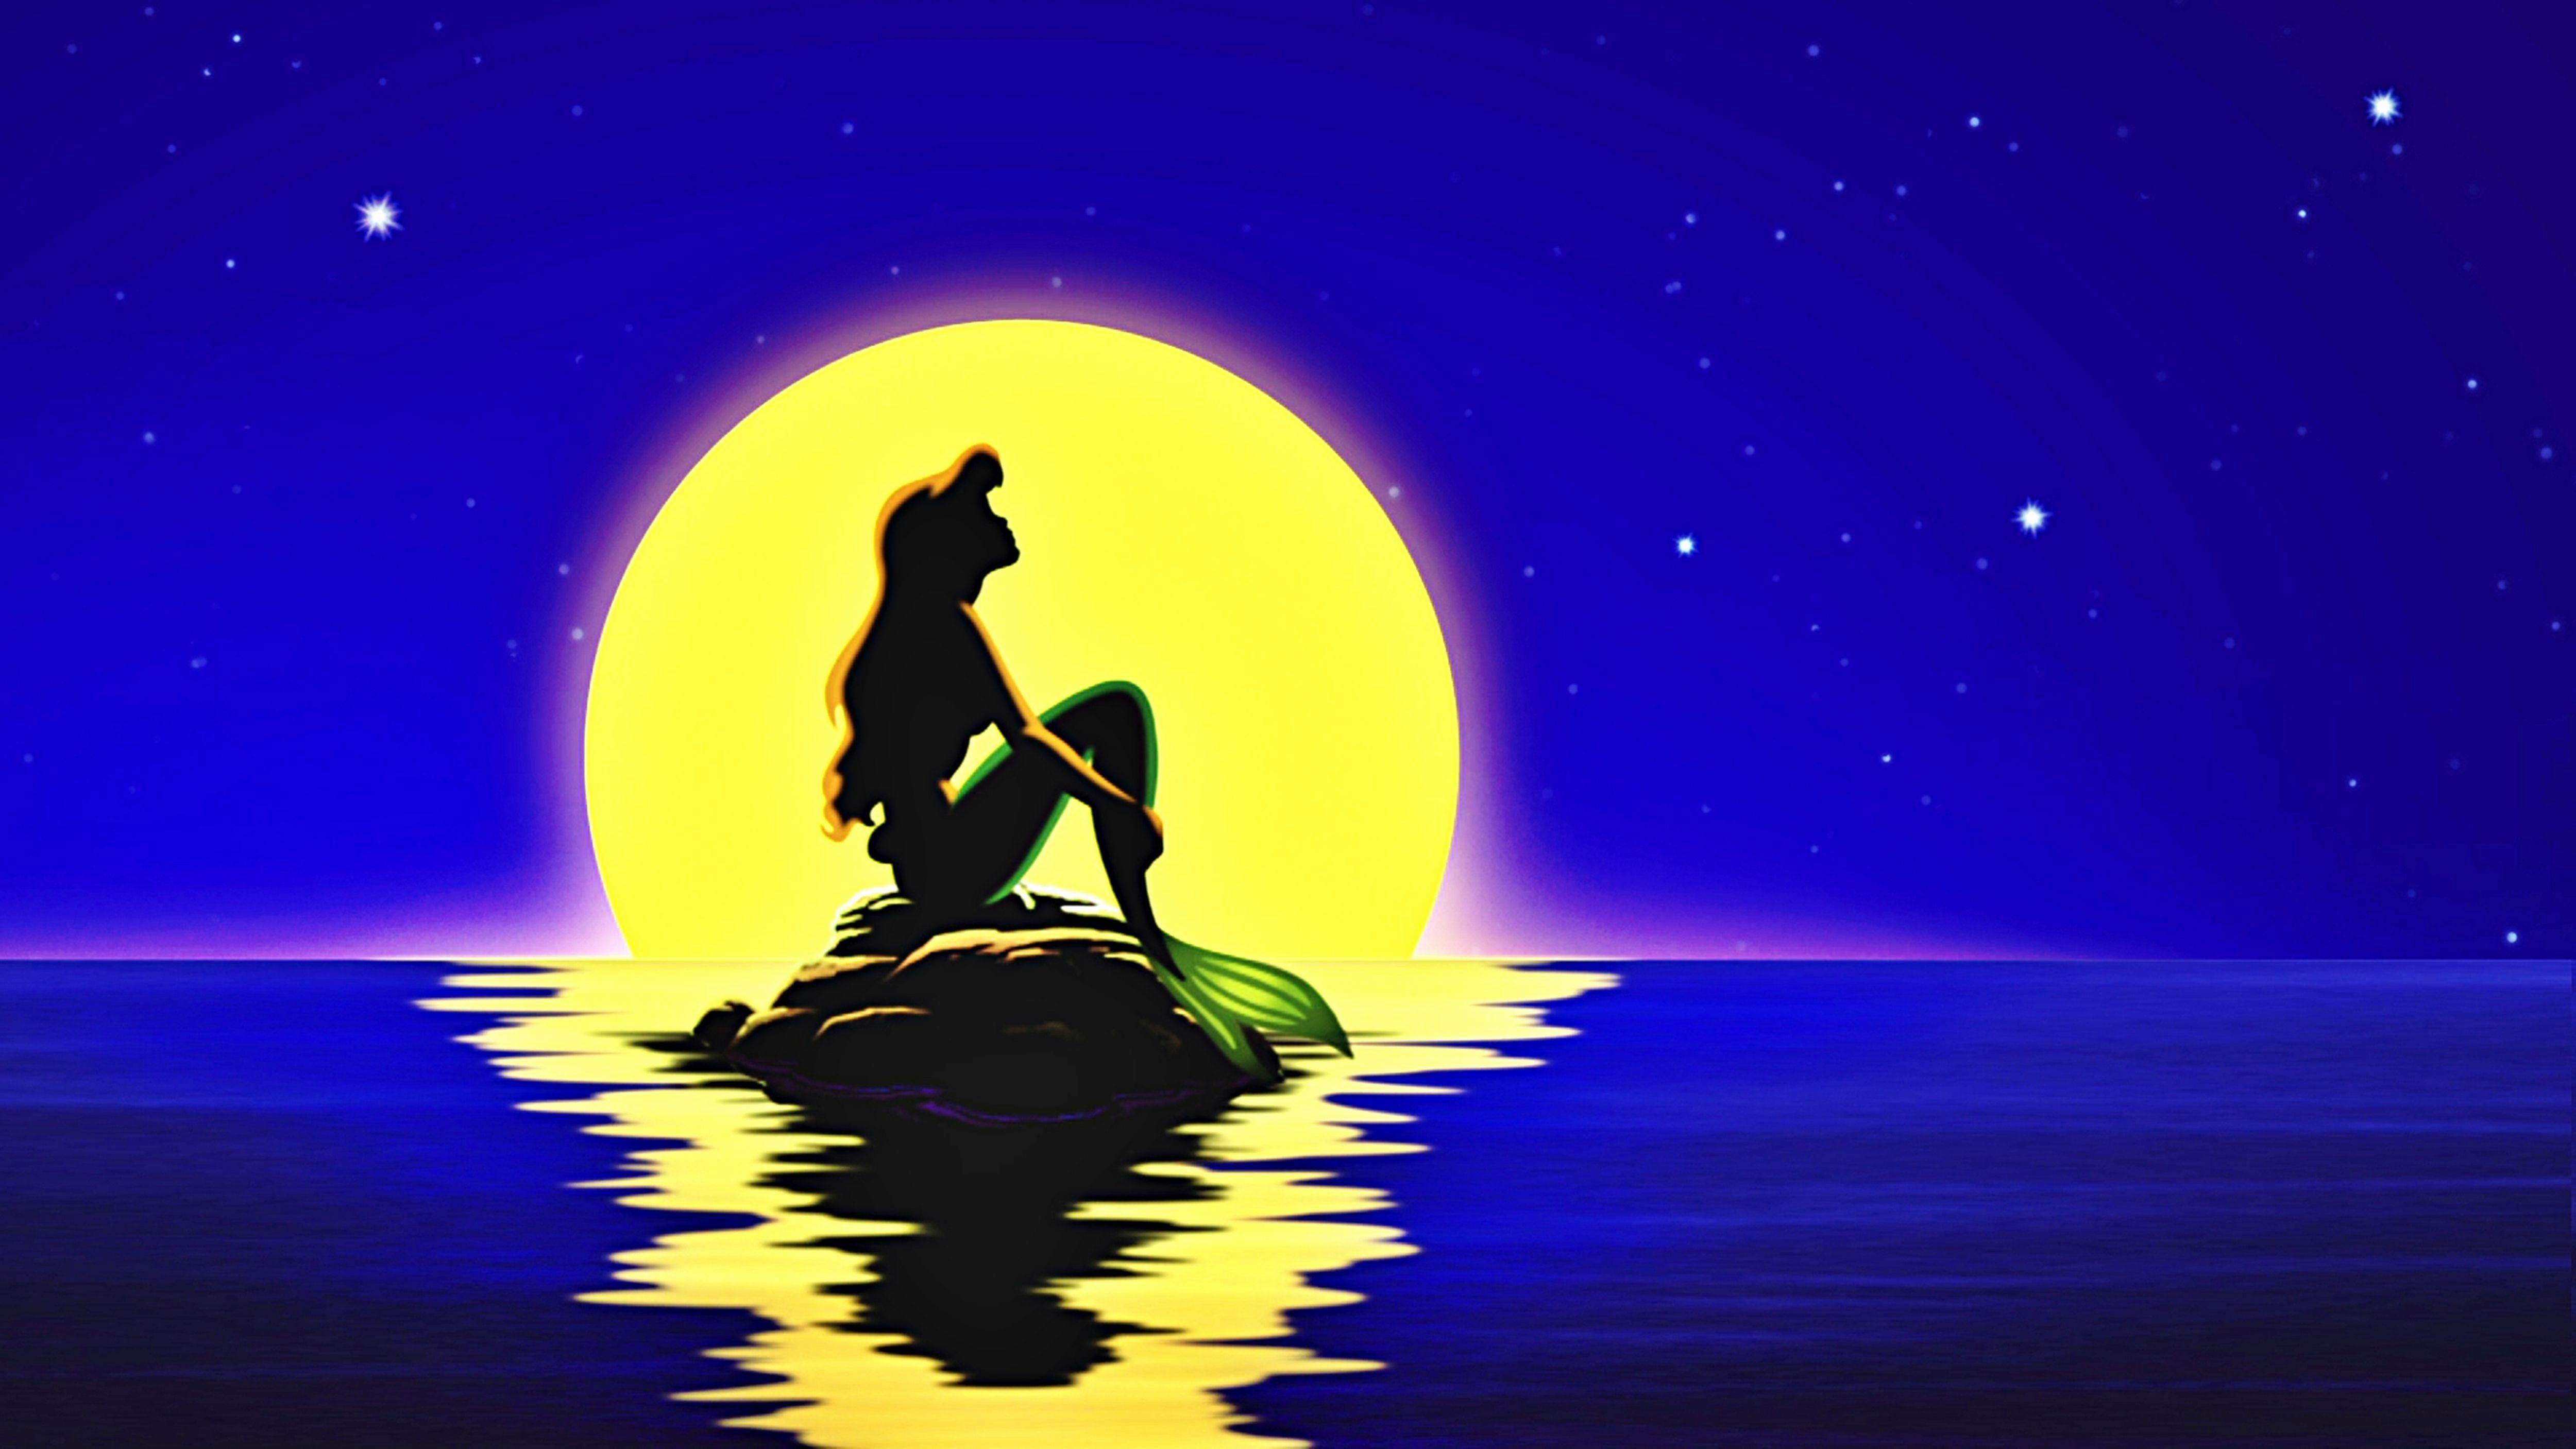 The Little Mermaid Wallpaper Awesome Disney HD Wallpaper the Little Mermaid HD Wallpaper Ideas of The Hudson